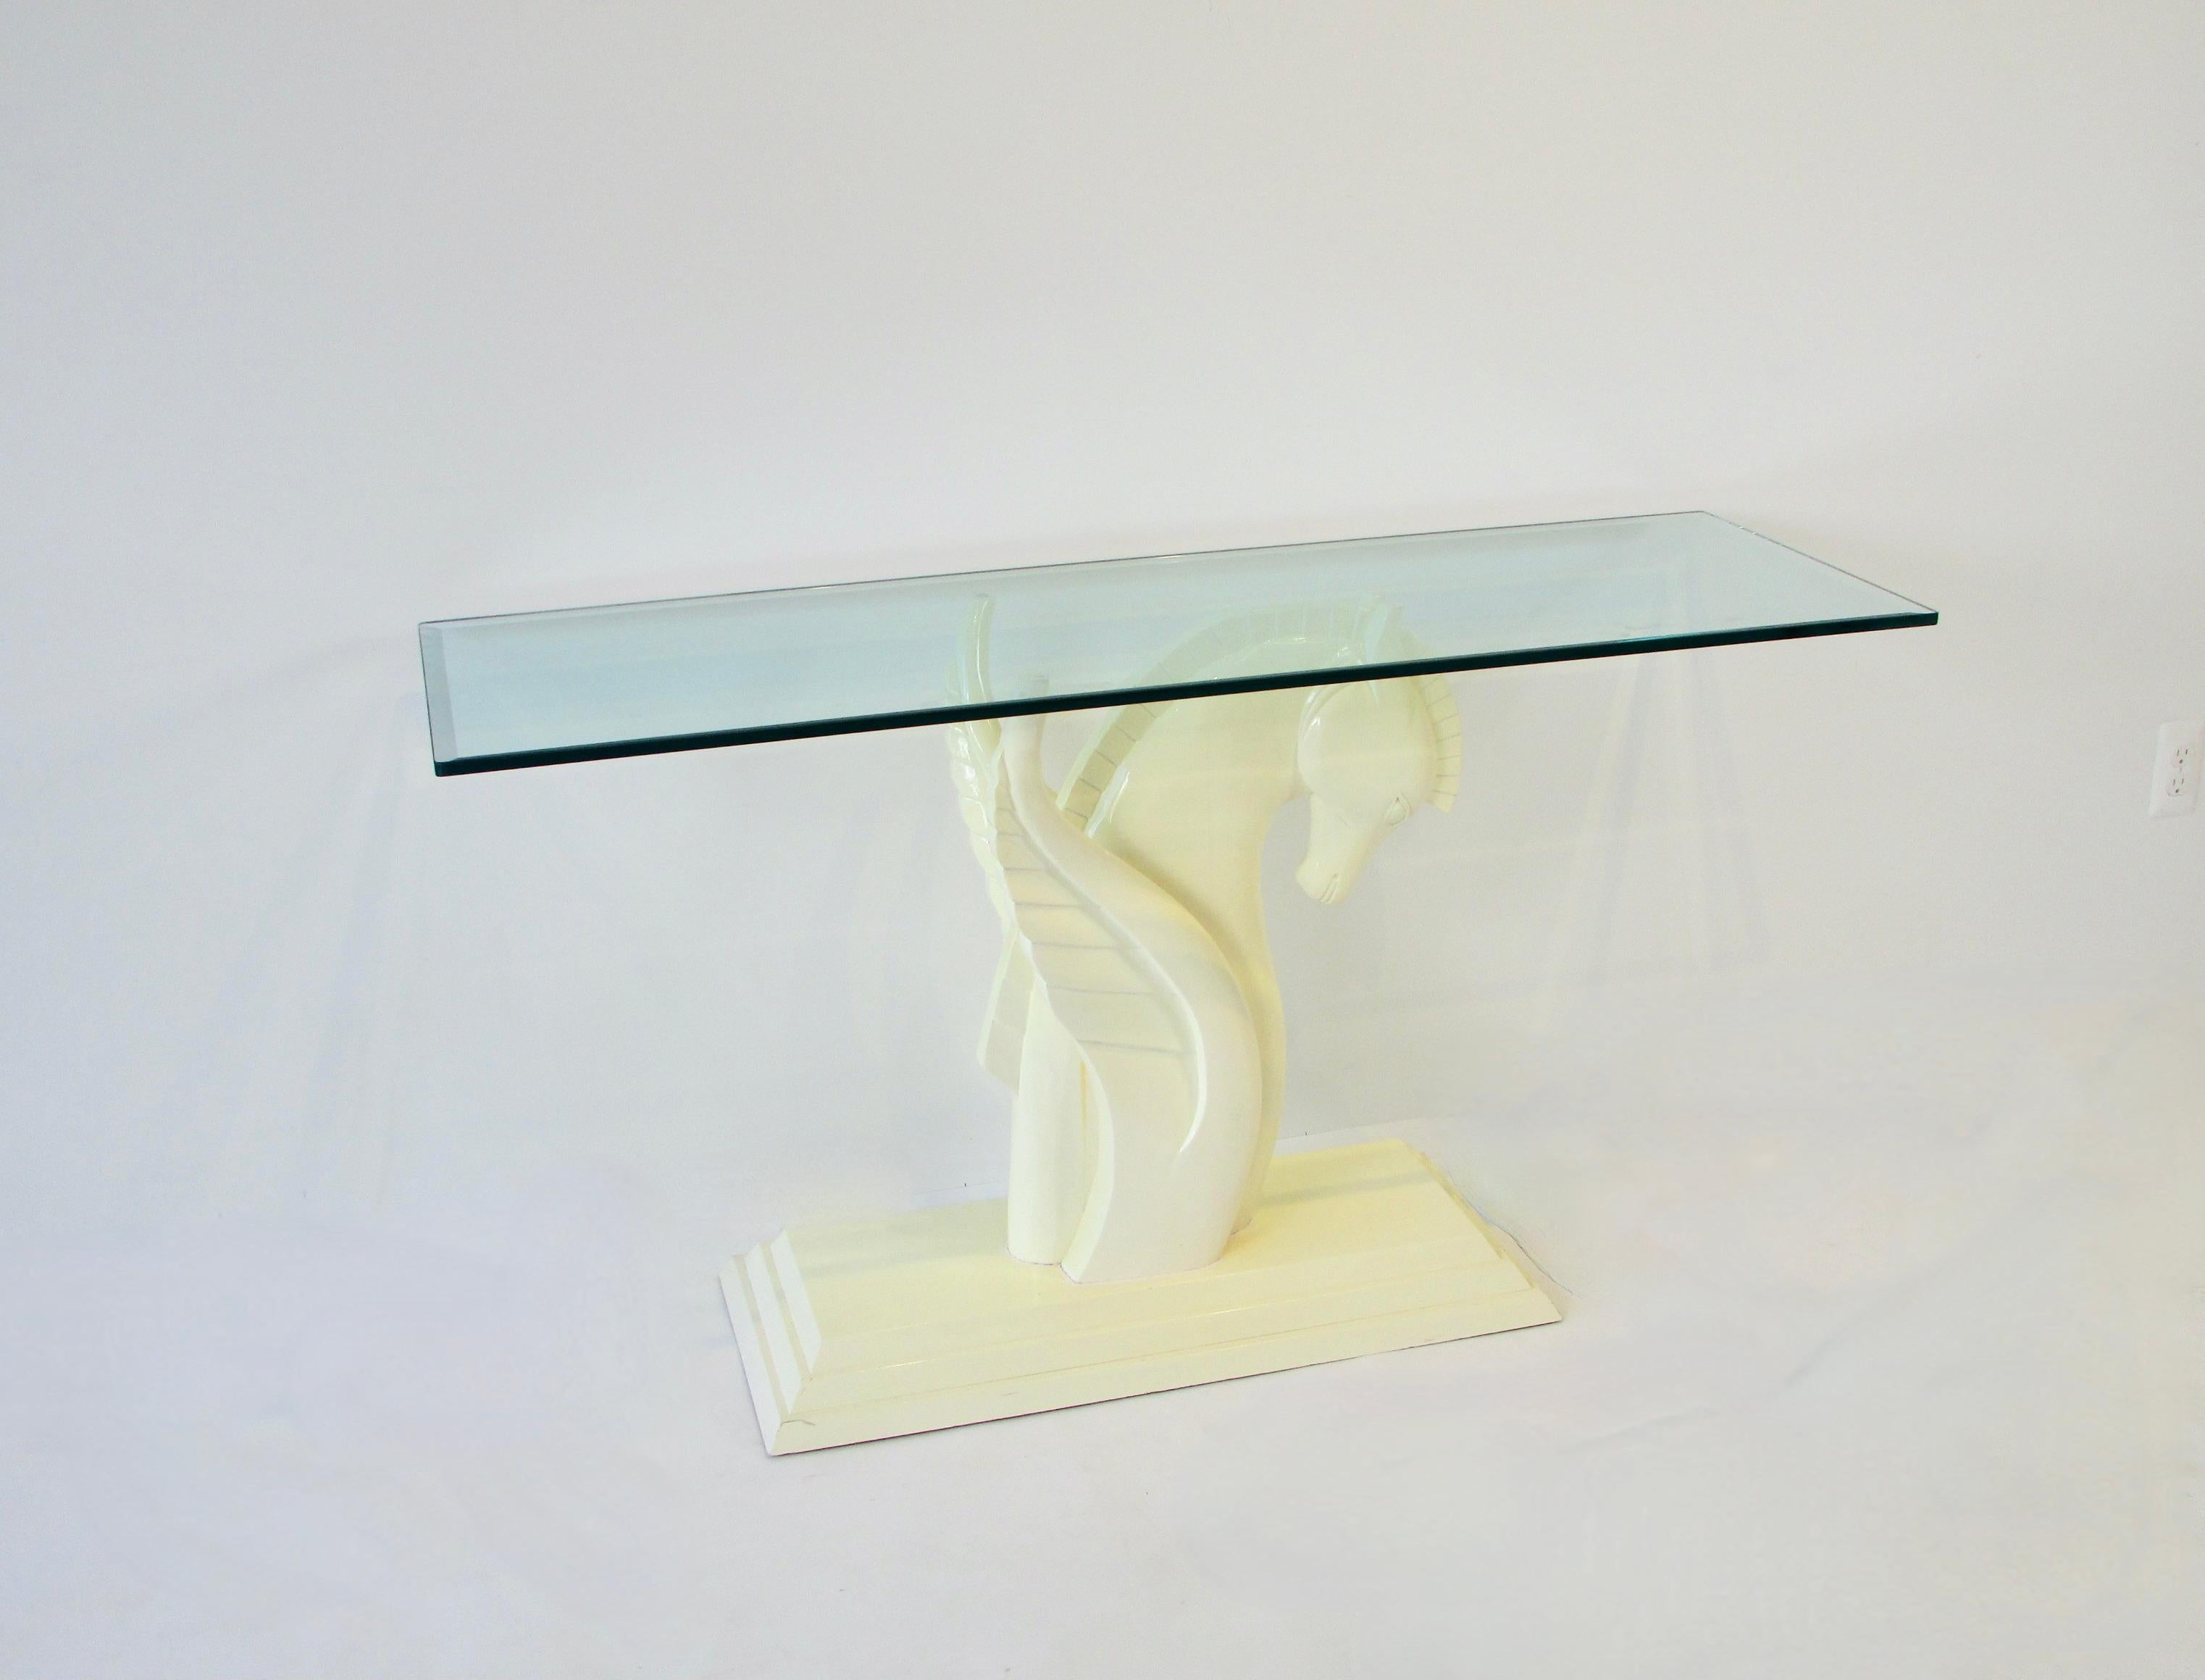 karl springer console table